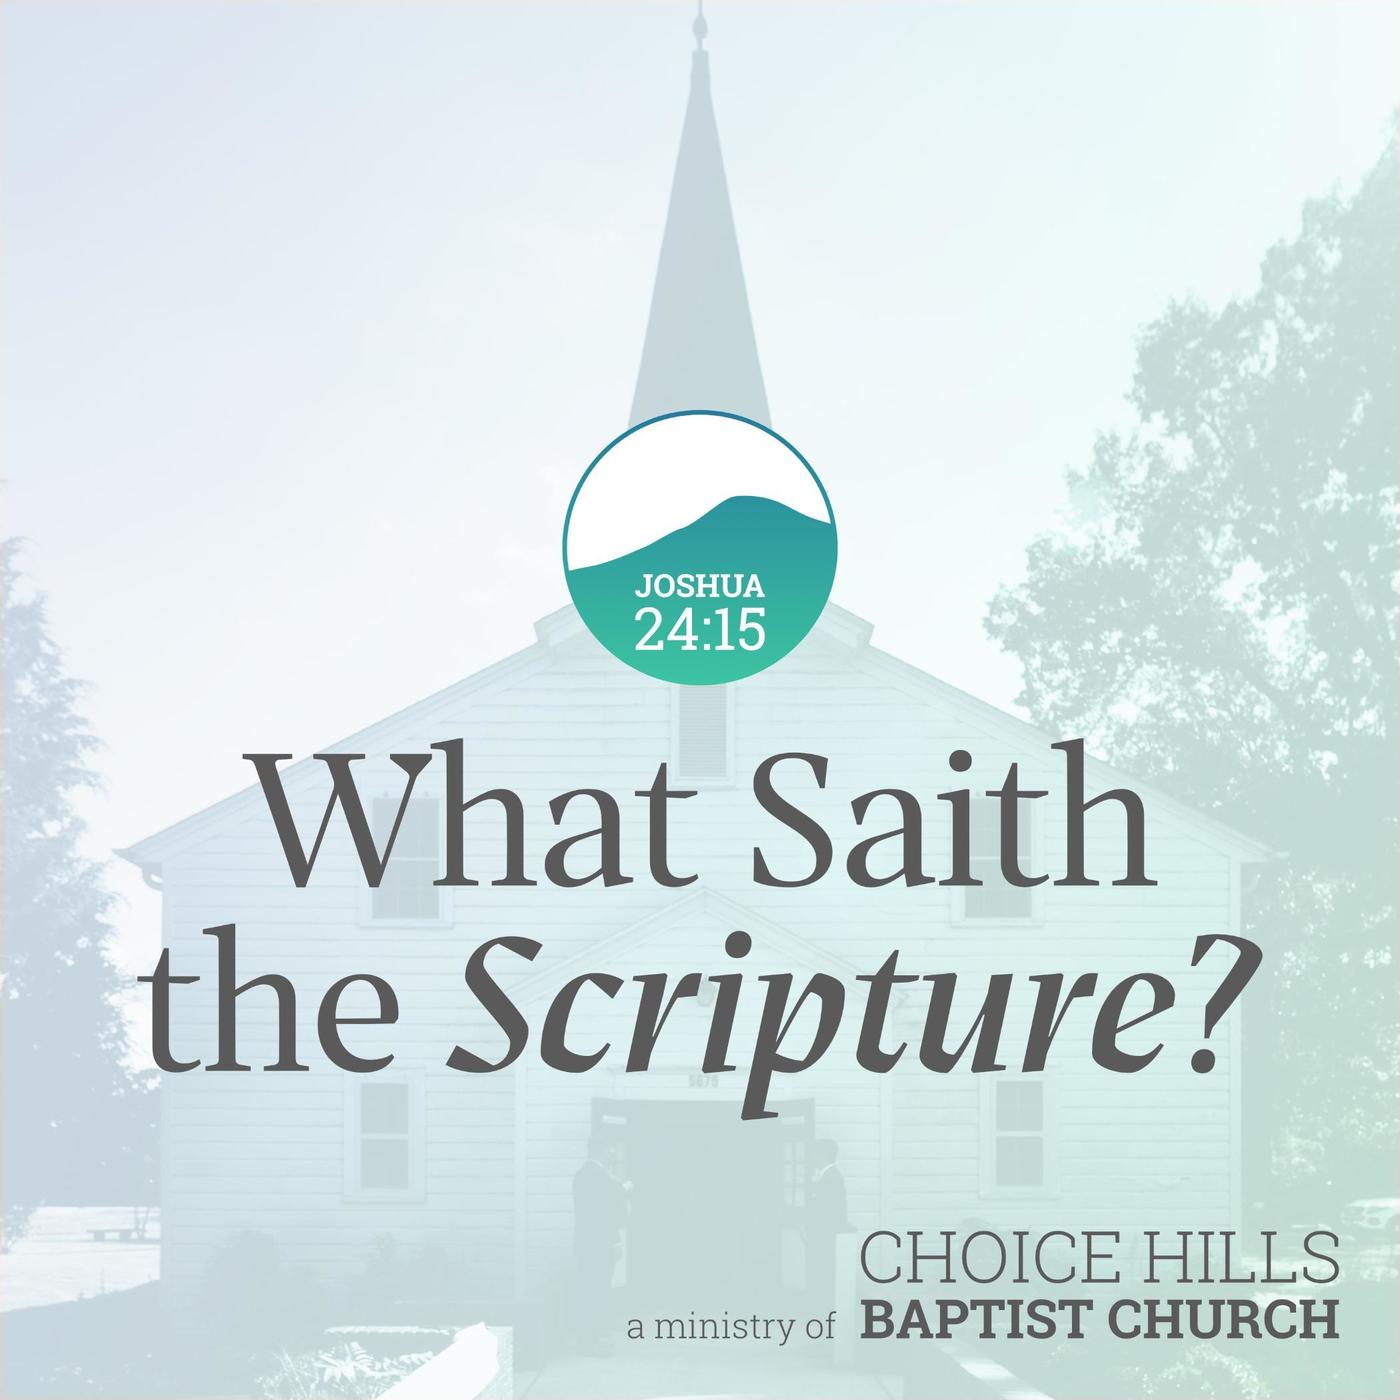 Adult Sunday School: Study of the 119th Psalm (Part 7)